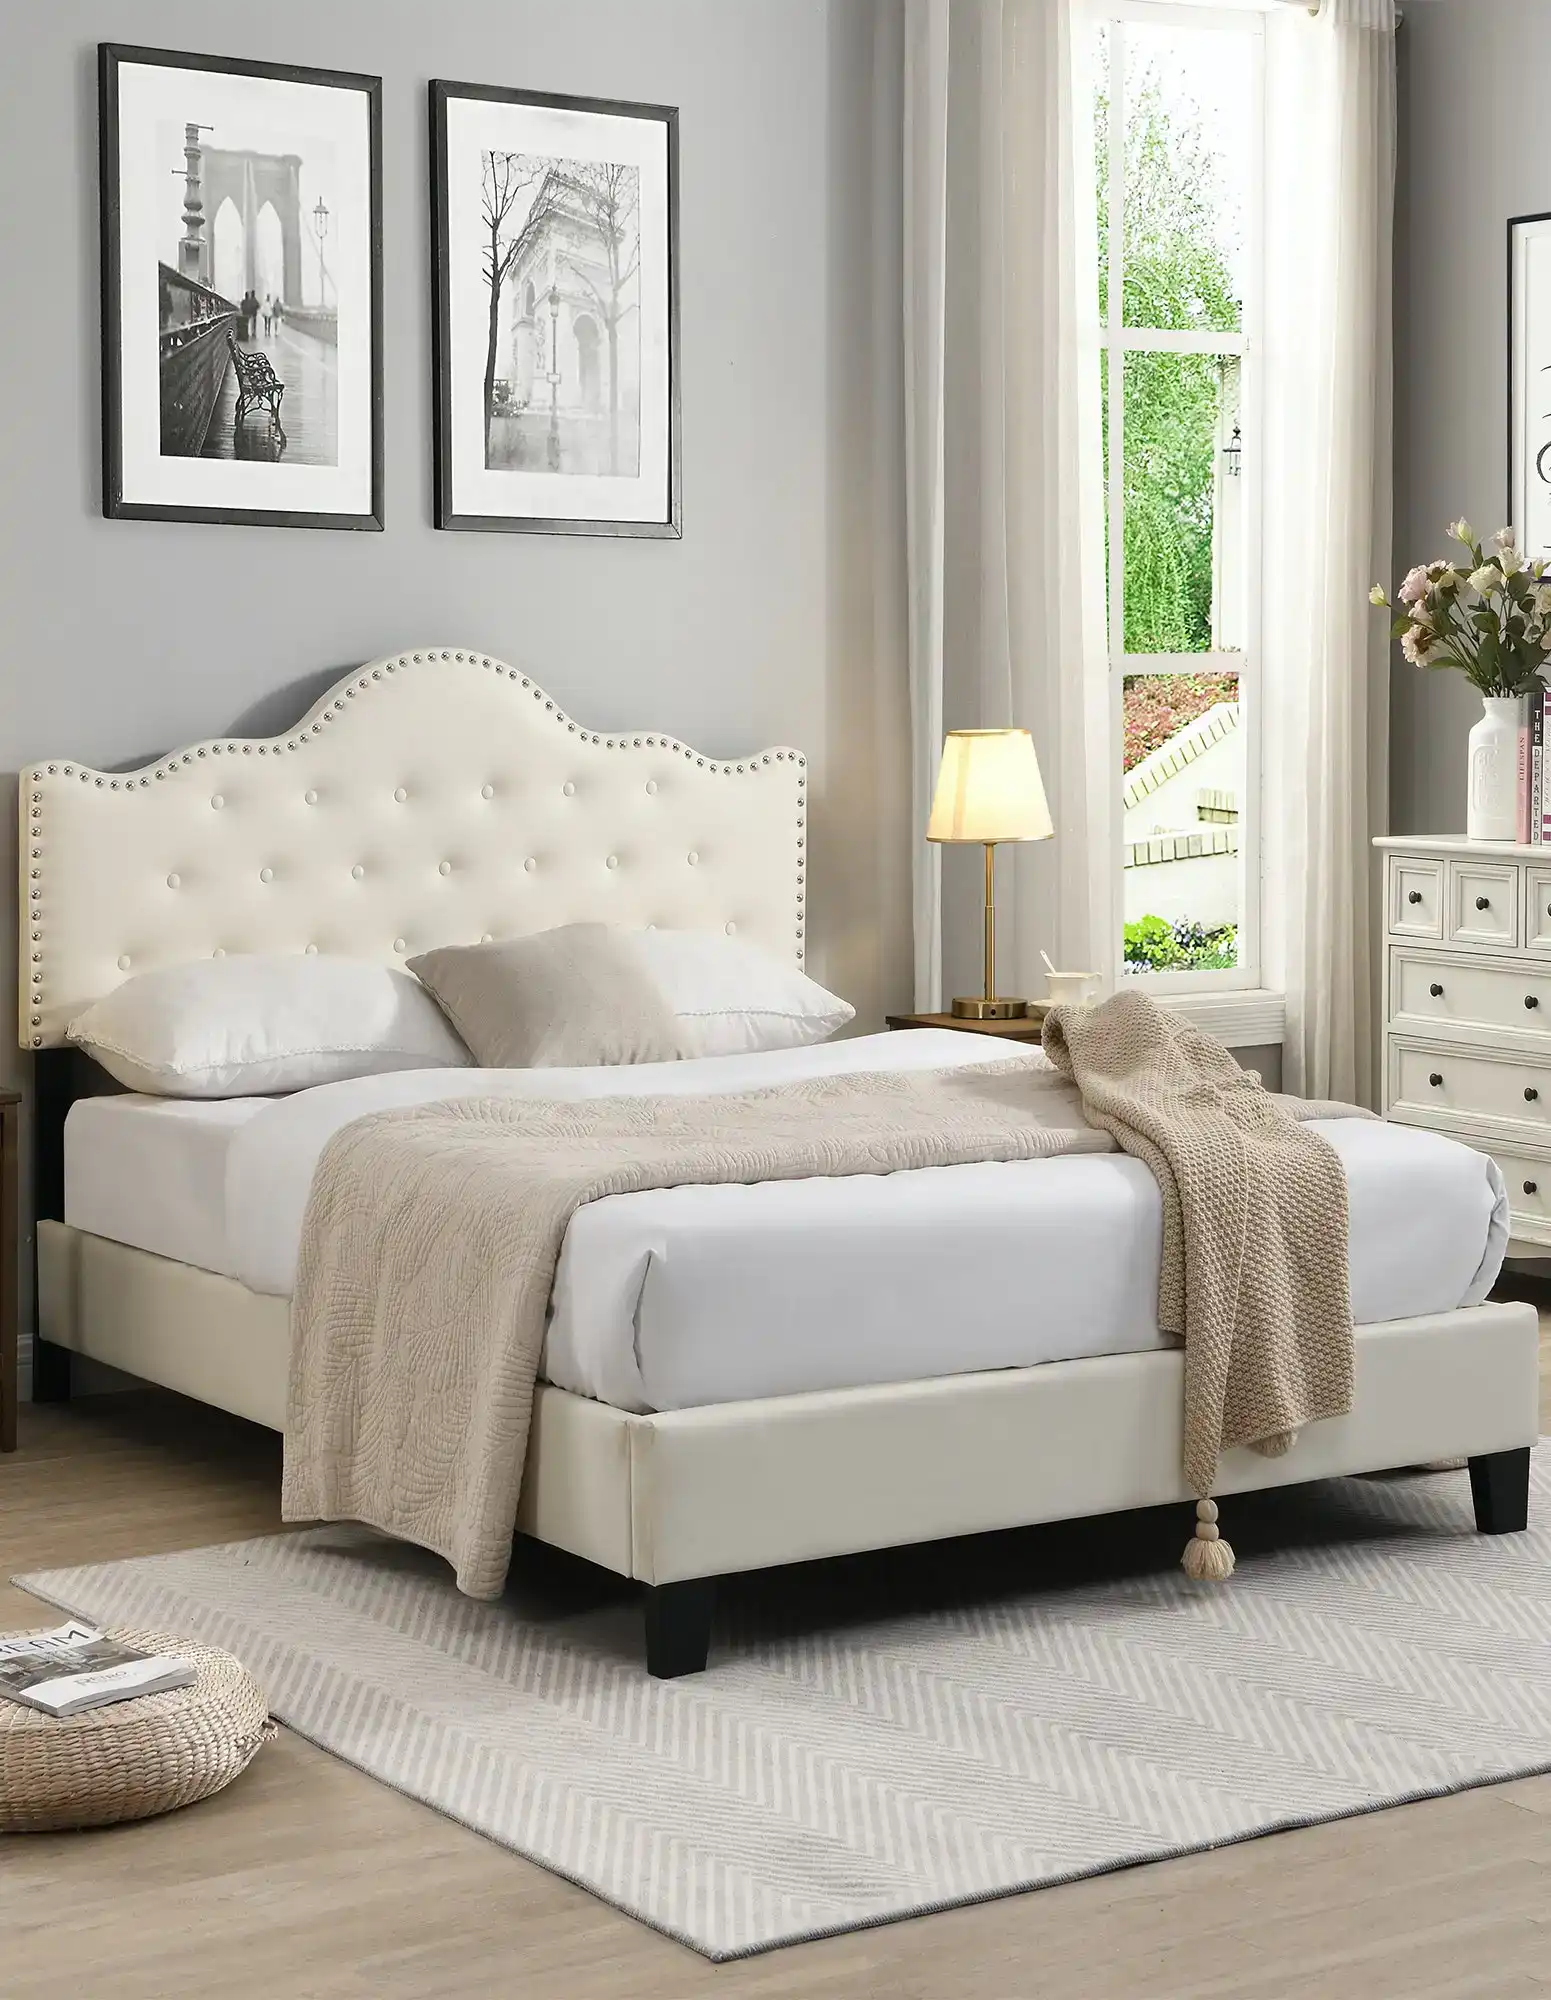 IHOMDEC Upholstered Button Tufted Double Bed Frame BEF05 Beige